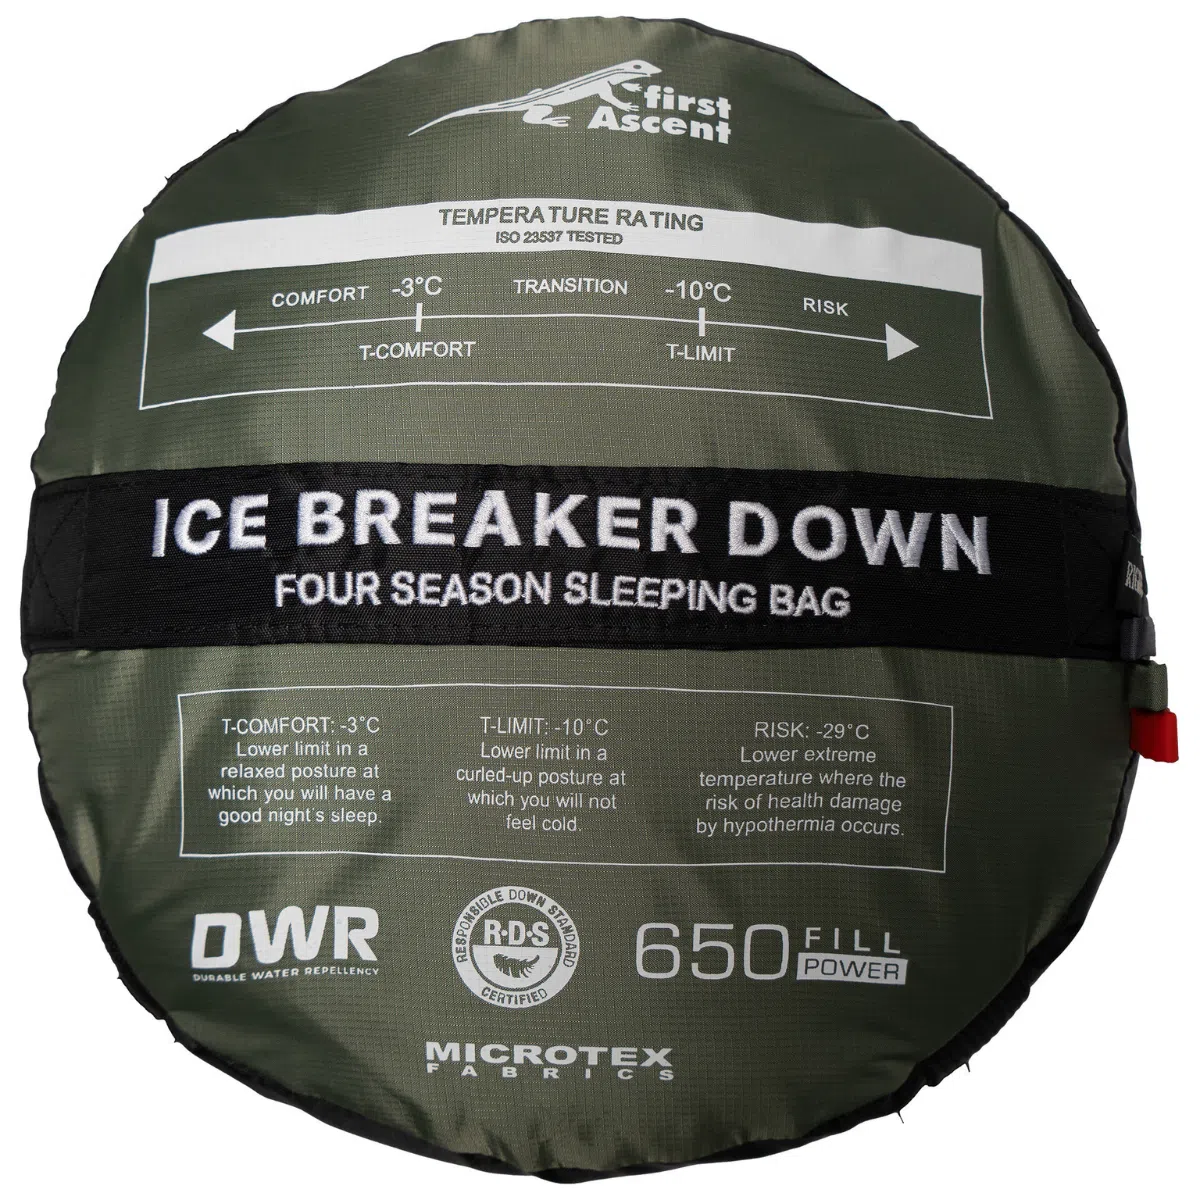 First Ascent Ice Breaker Green